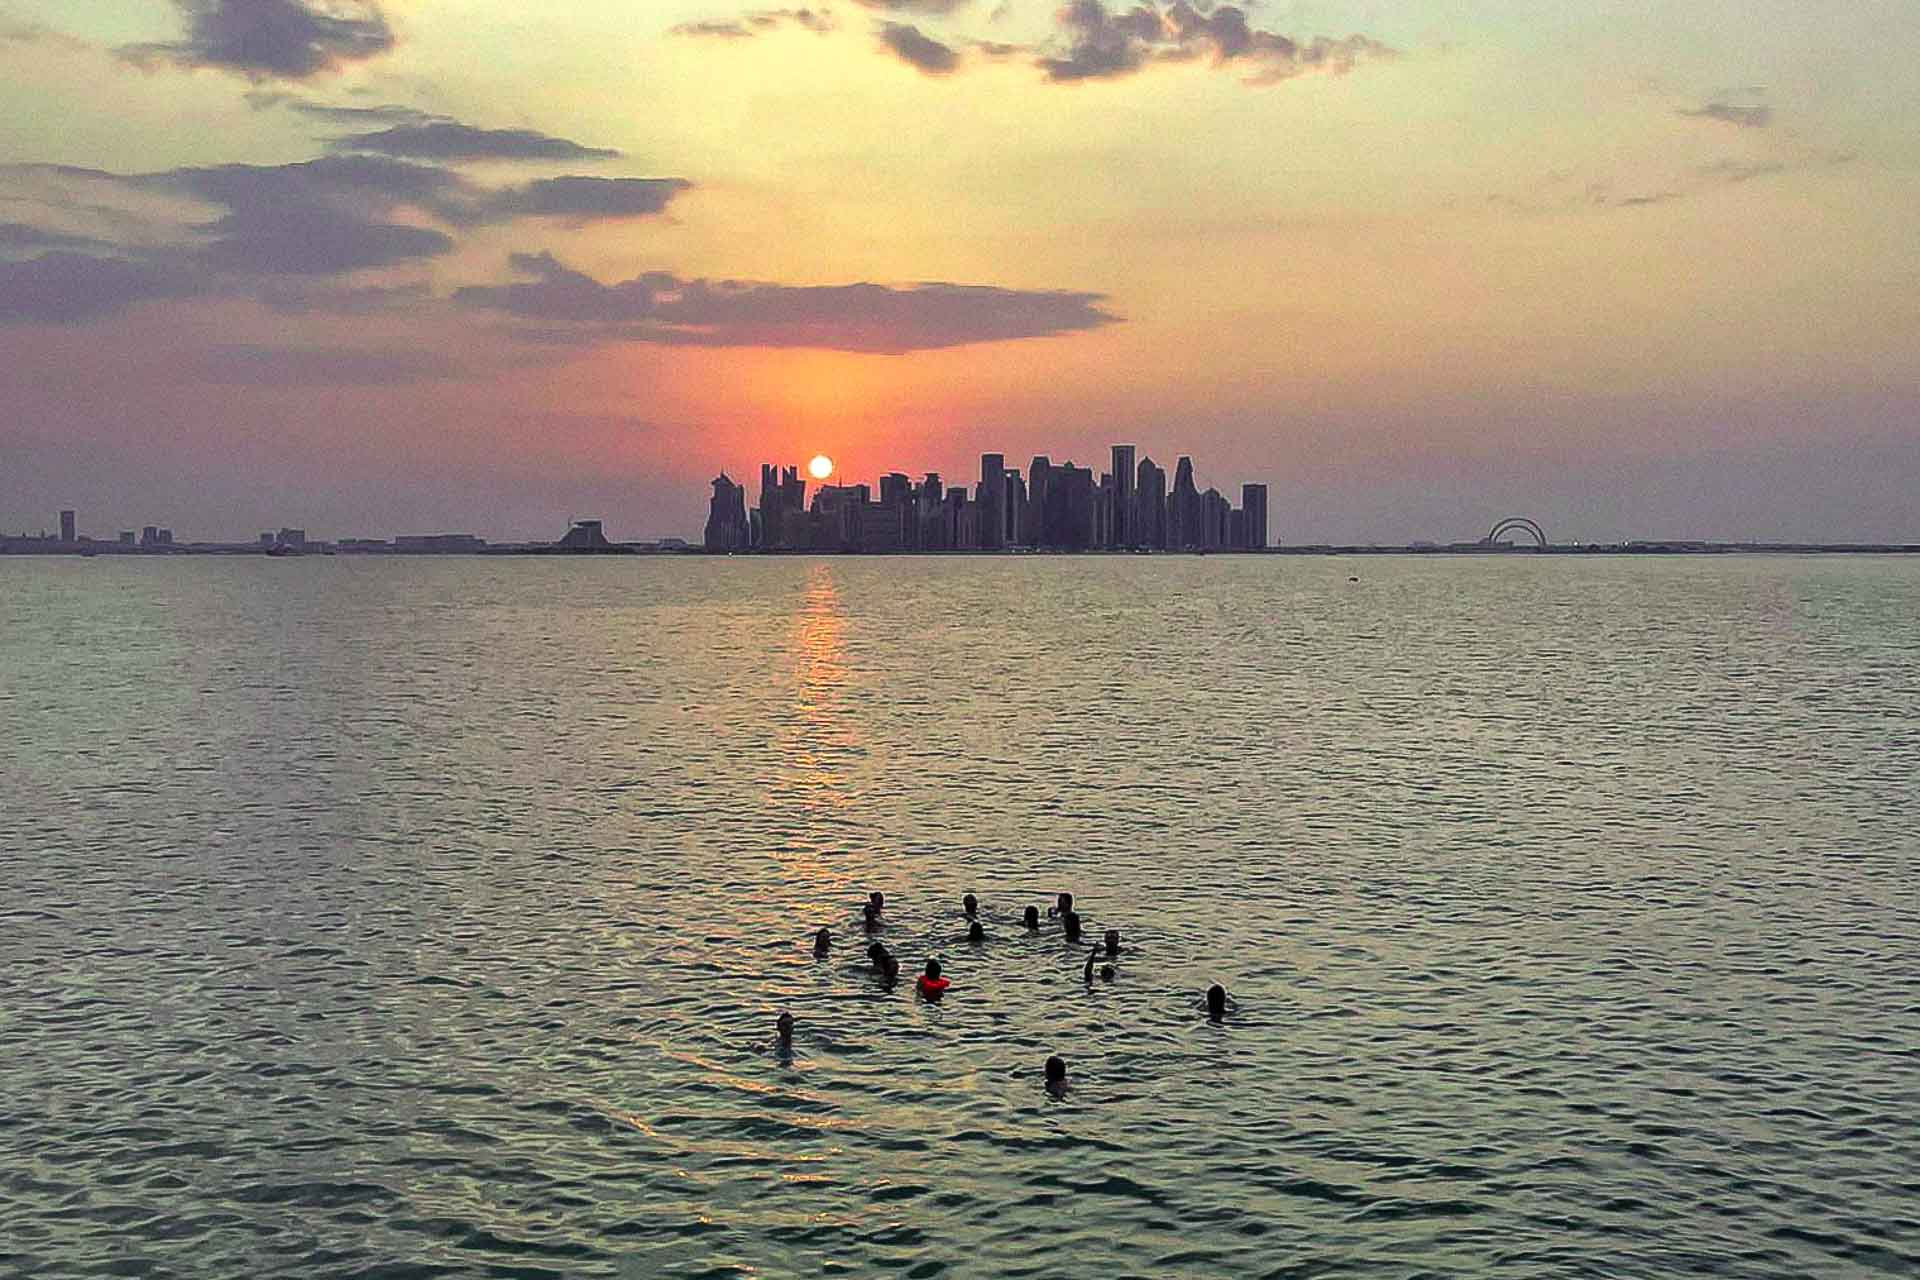 Panoramic view of the city of Doha from the sea with a group of people in the water and the sun setting behind the high buildings of the city